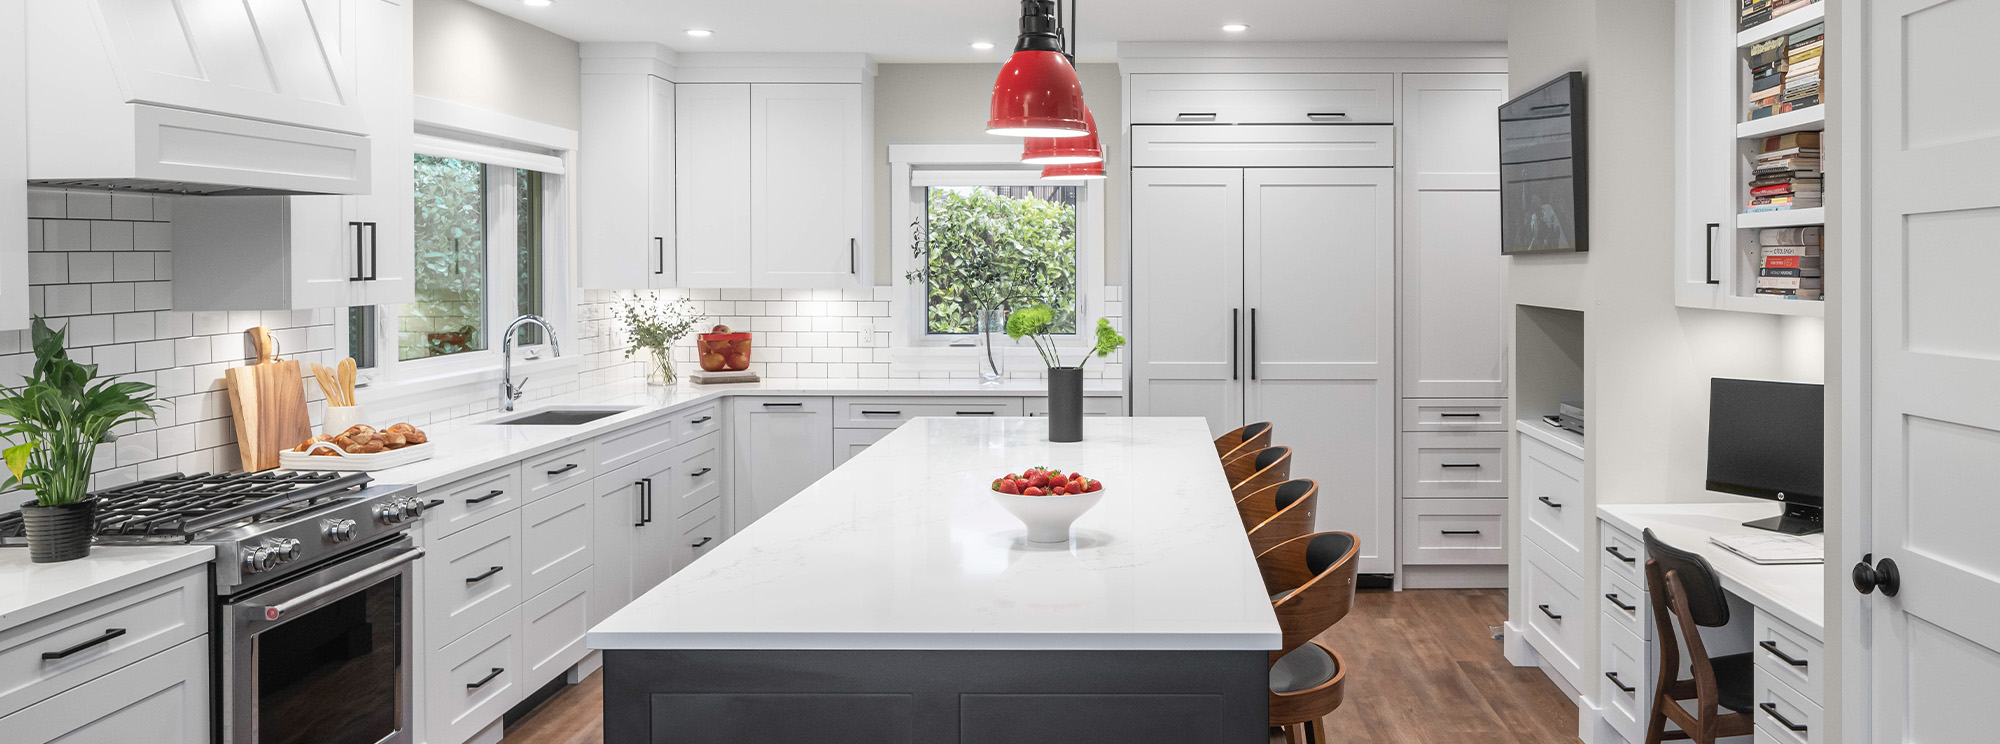 Modern kitchen featuring white cabinets and a vibrant red pendant light.